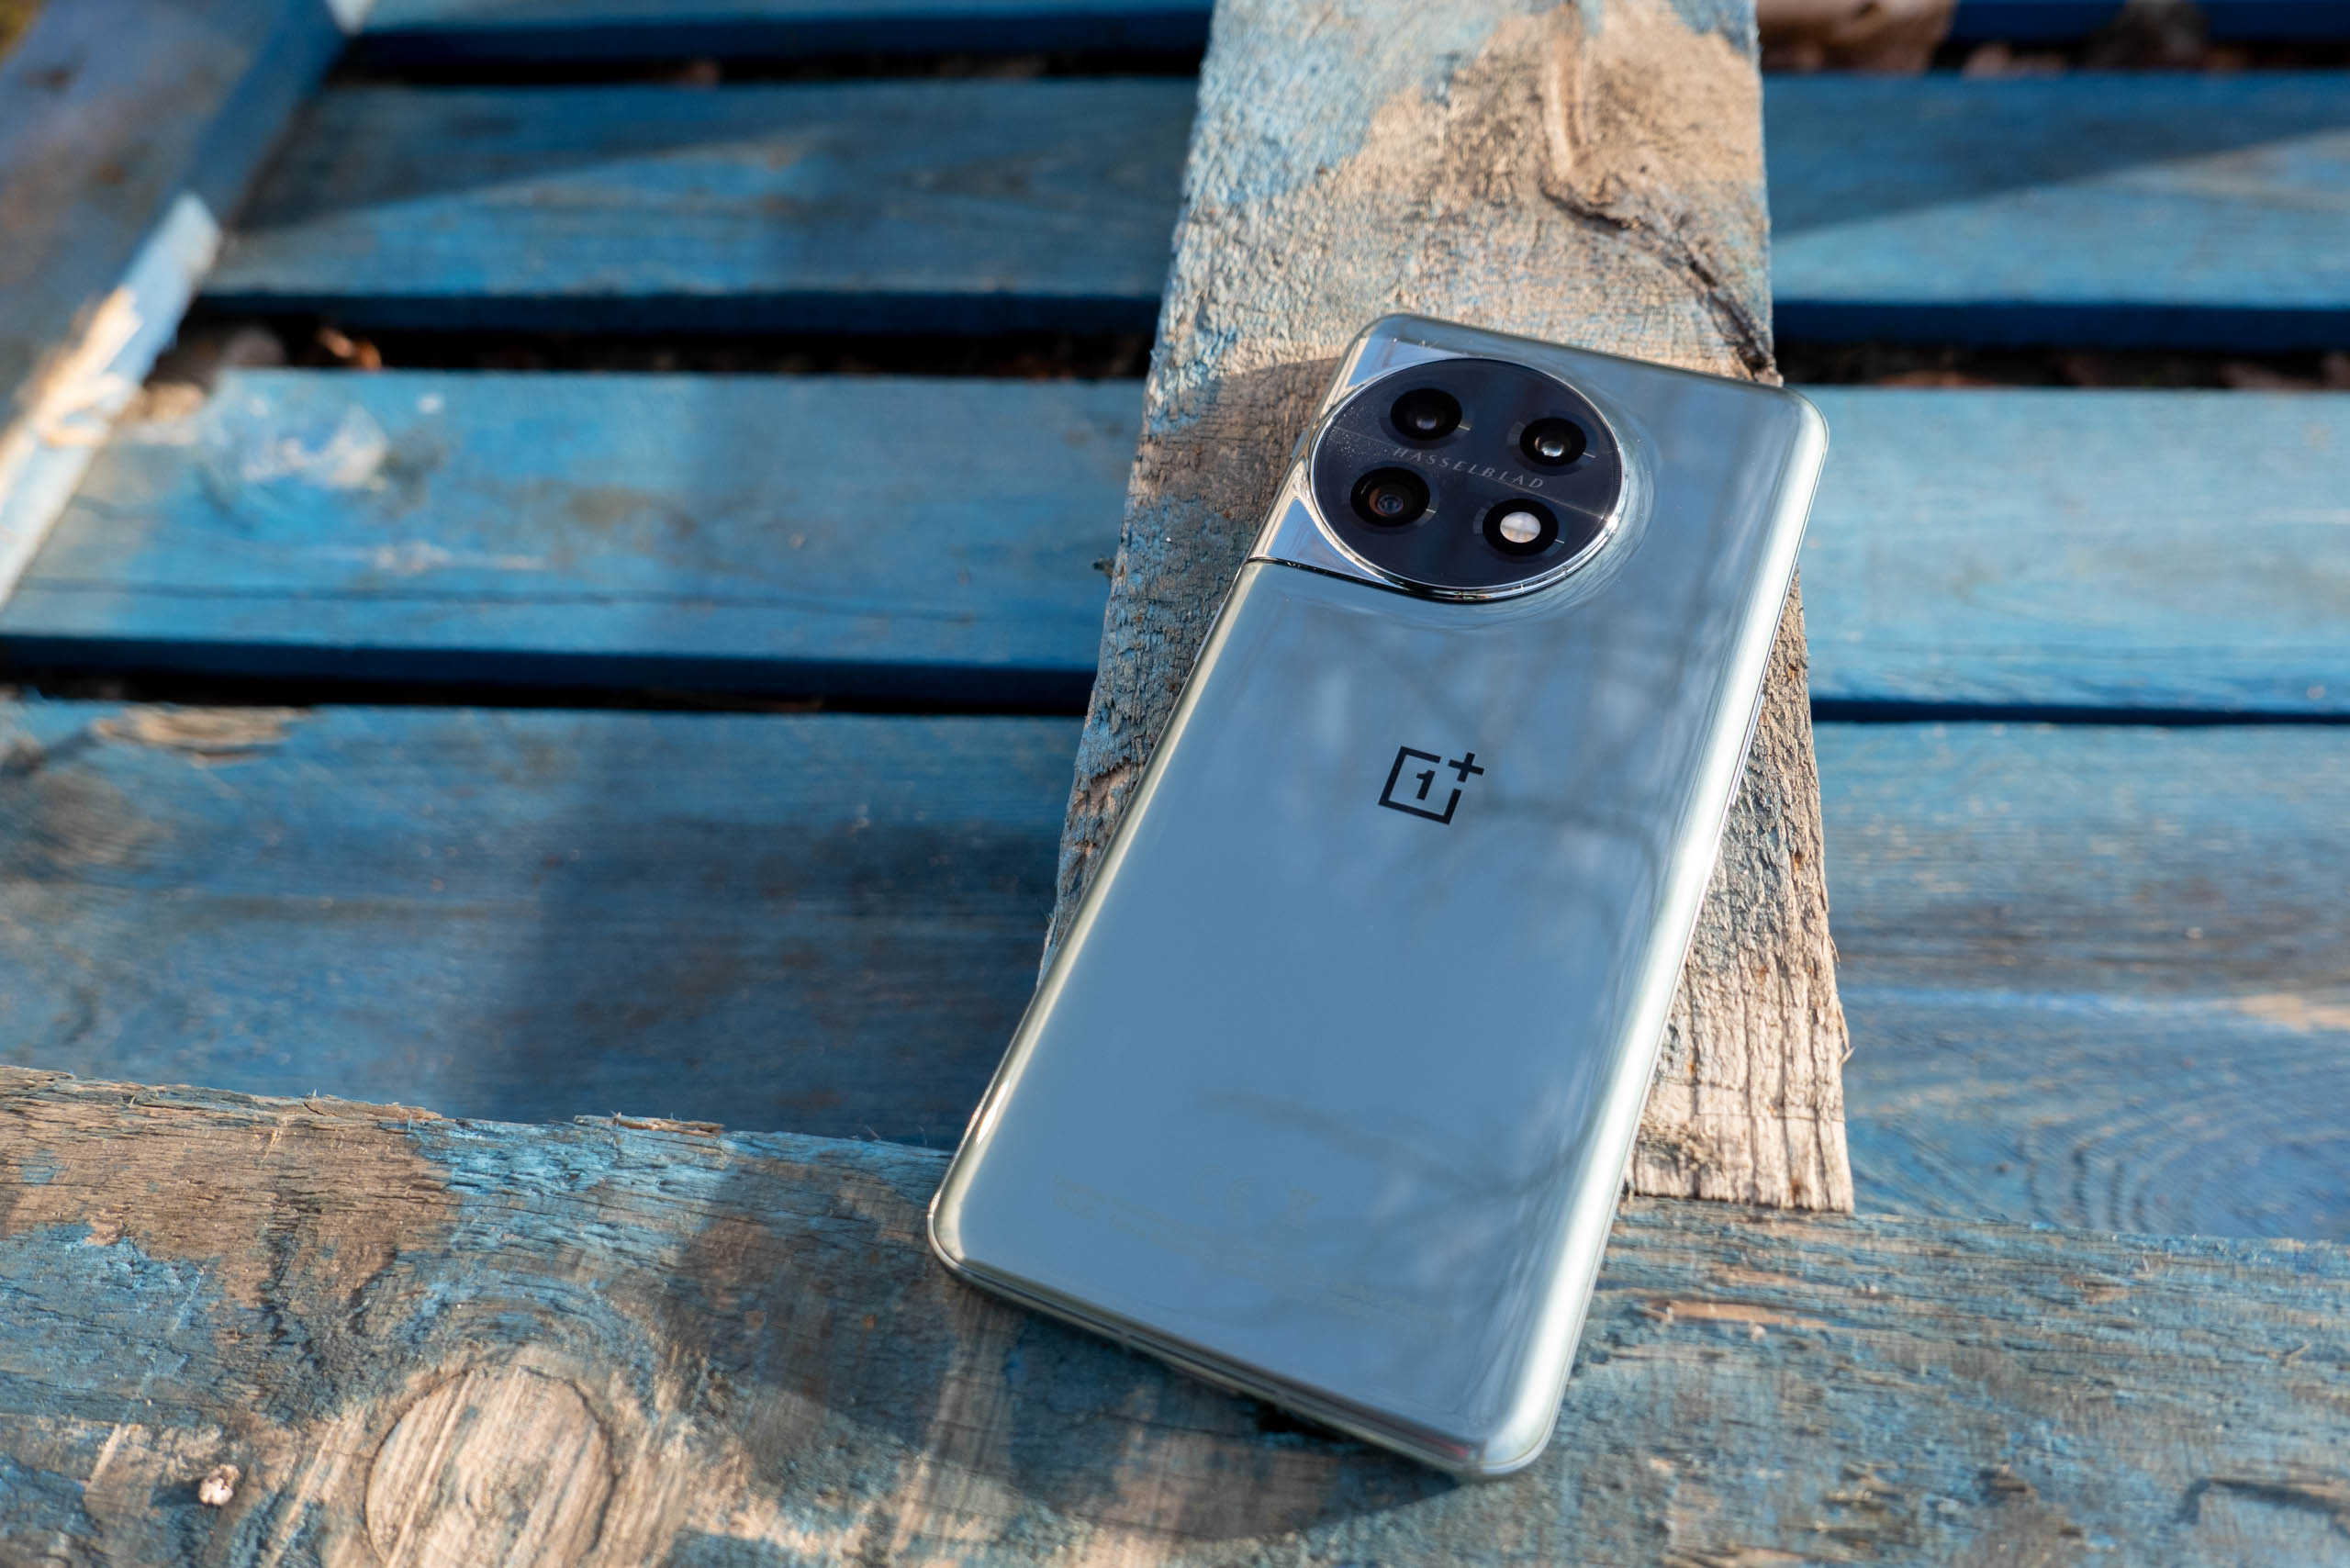 OnePlus 11 with a Hasselblad tuned camera system. Photo: Amy Davies